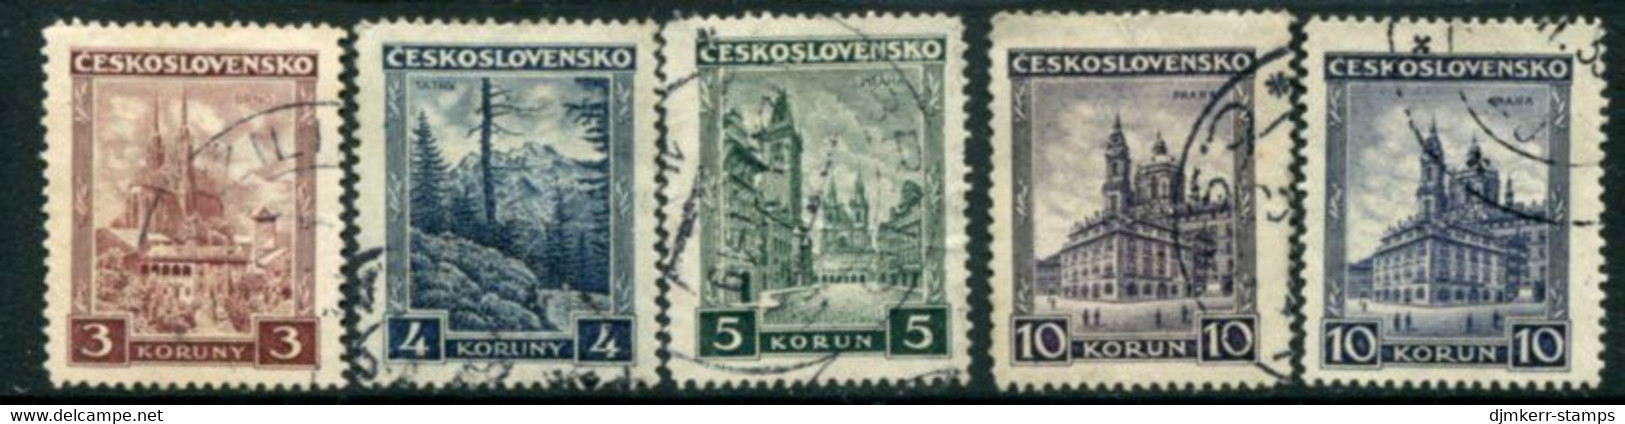 CZECHOSLOVAKIA 1929 Landscapes Used.  Michel 291-94a+b - Used Stamps